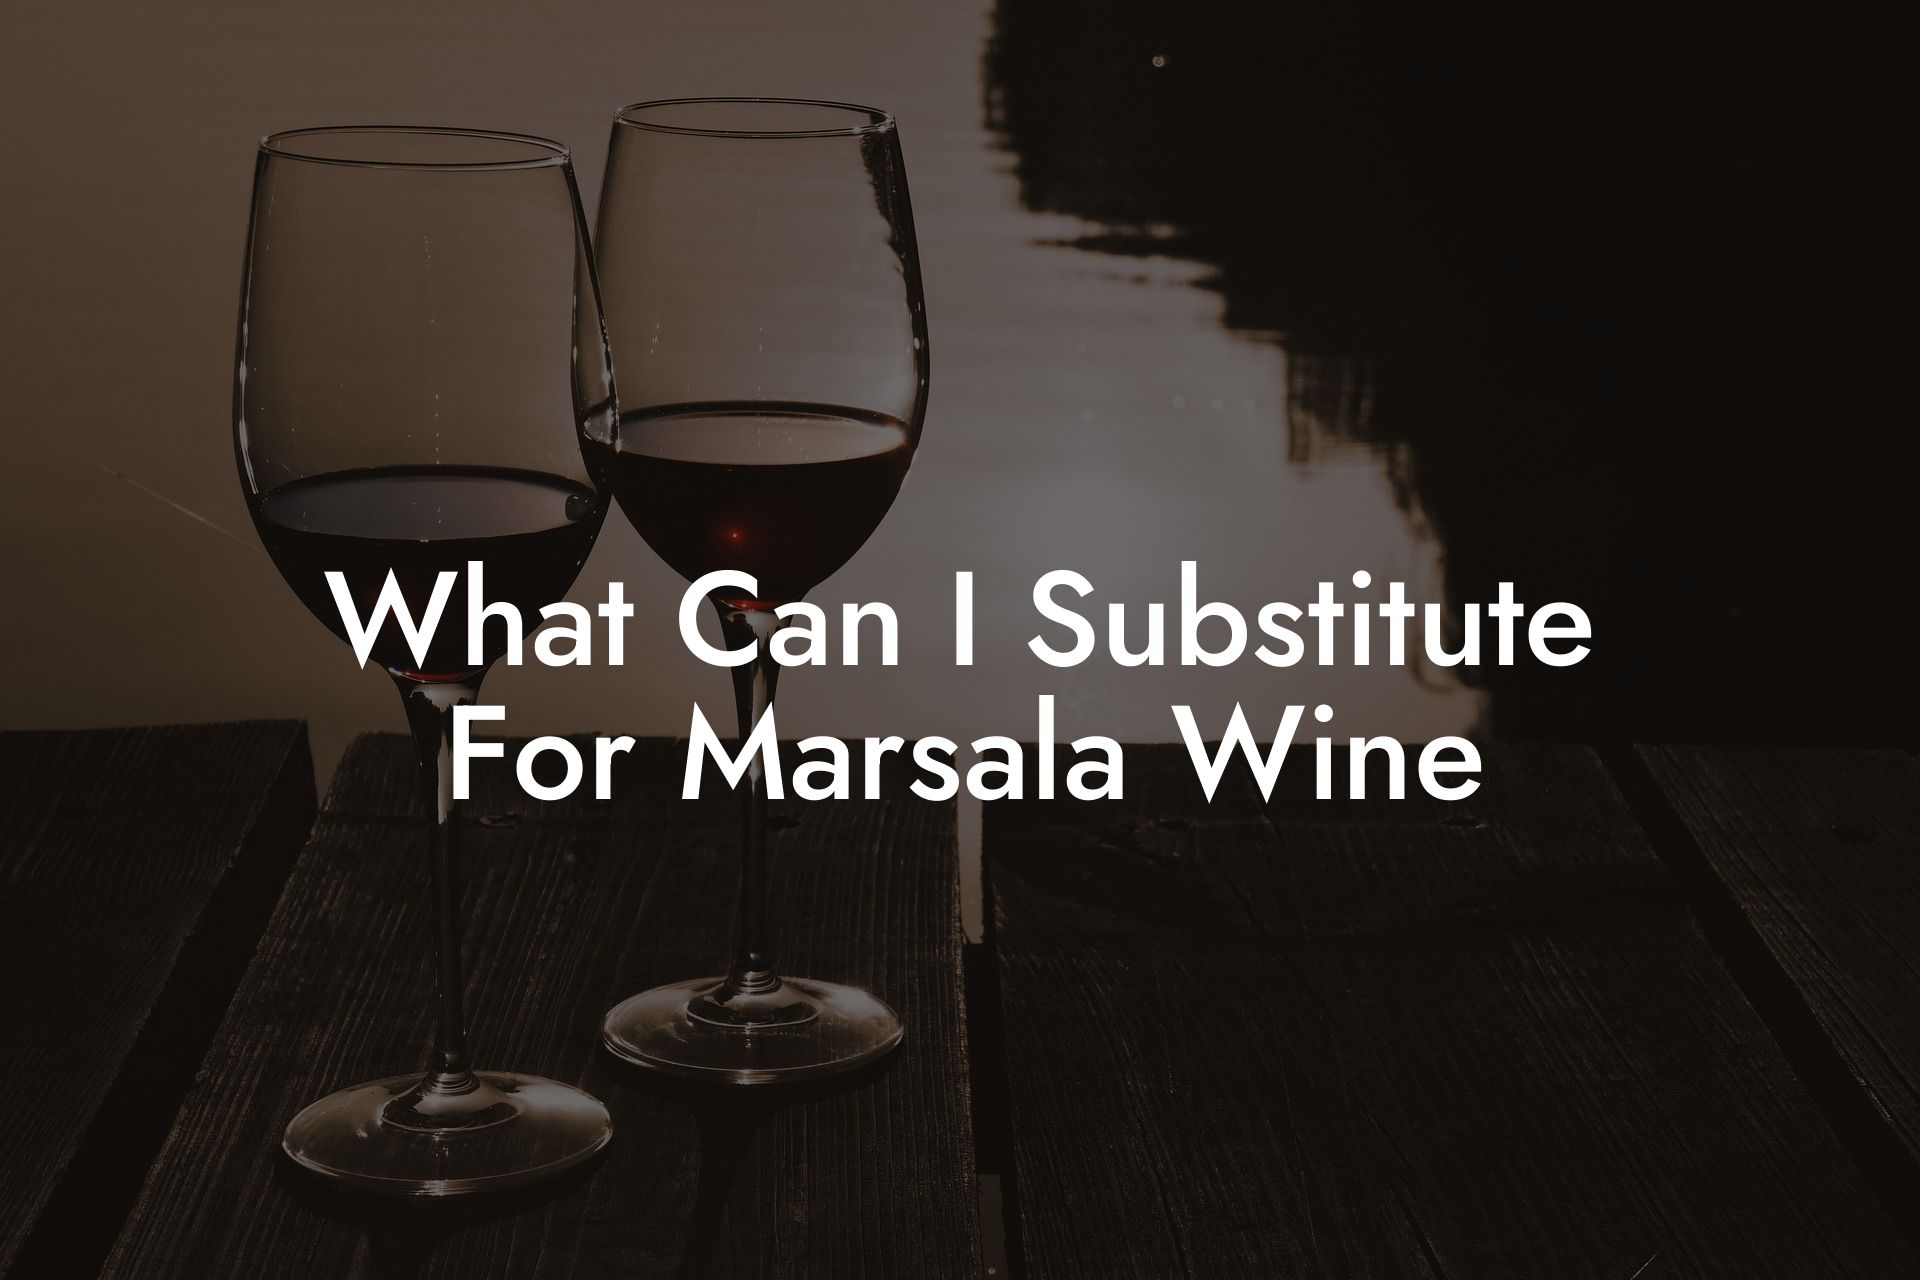 What Can I Substitute For Marsala Wine